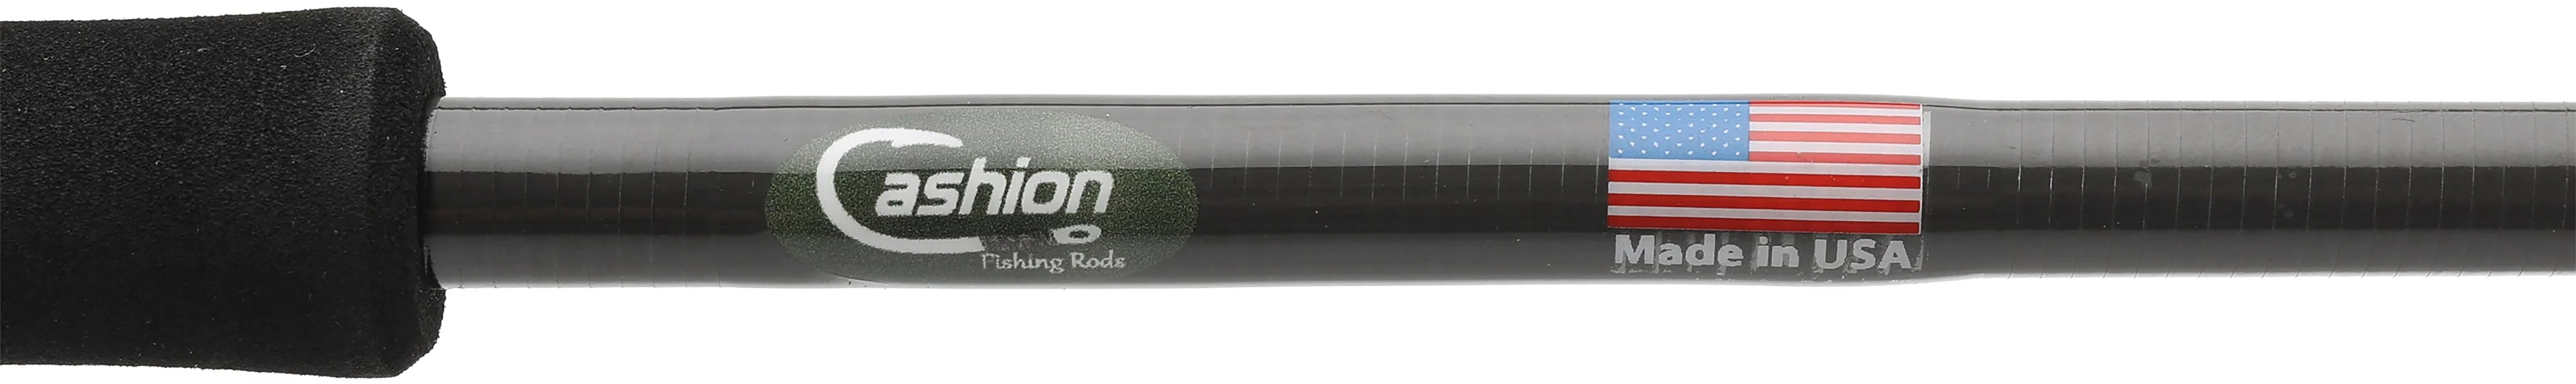 Cashion ICON Series Spinning Rods